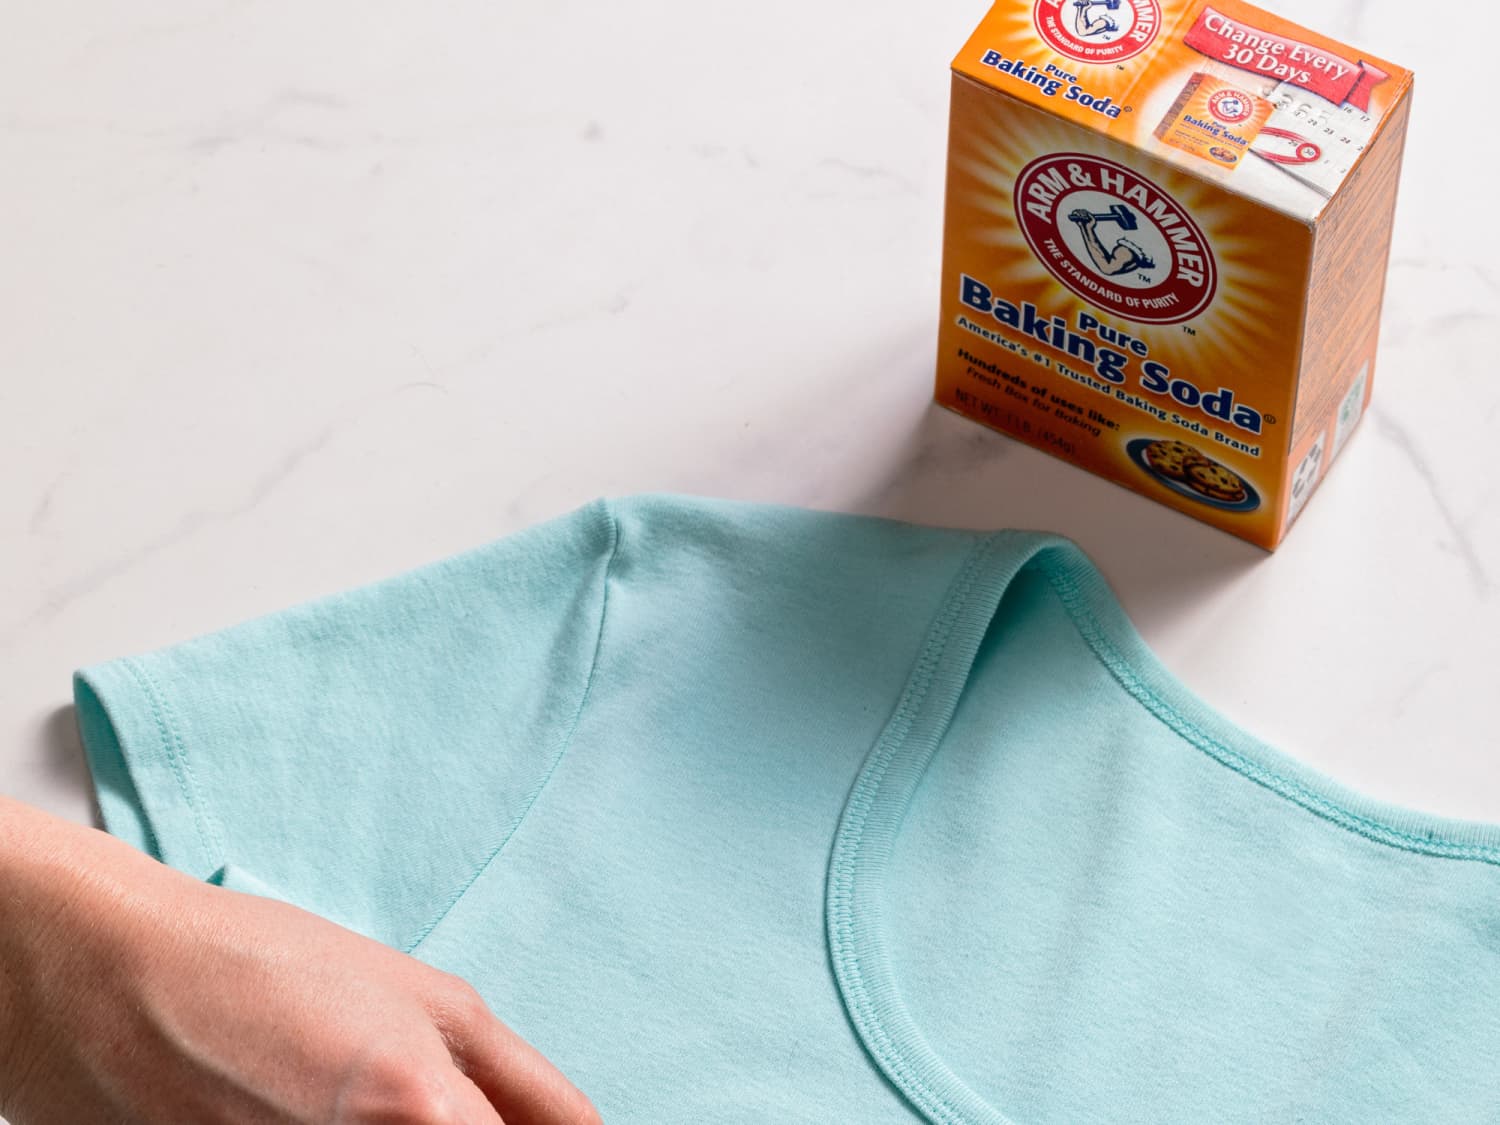 Here's How to Get Oil and Grease Stains Out of Your Clothes